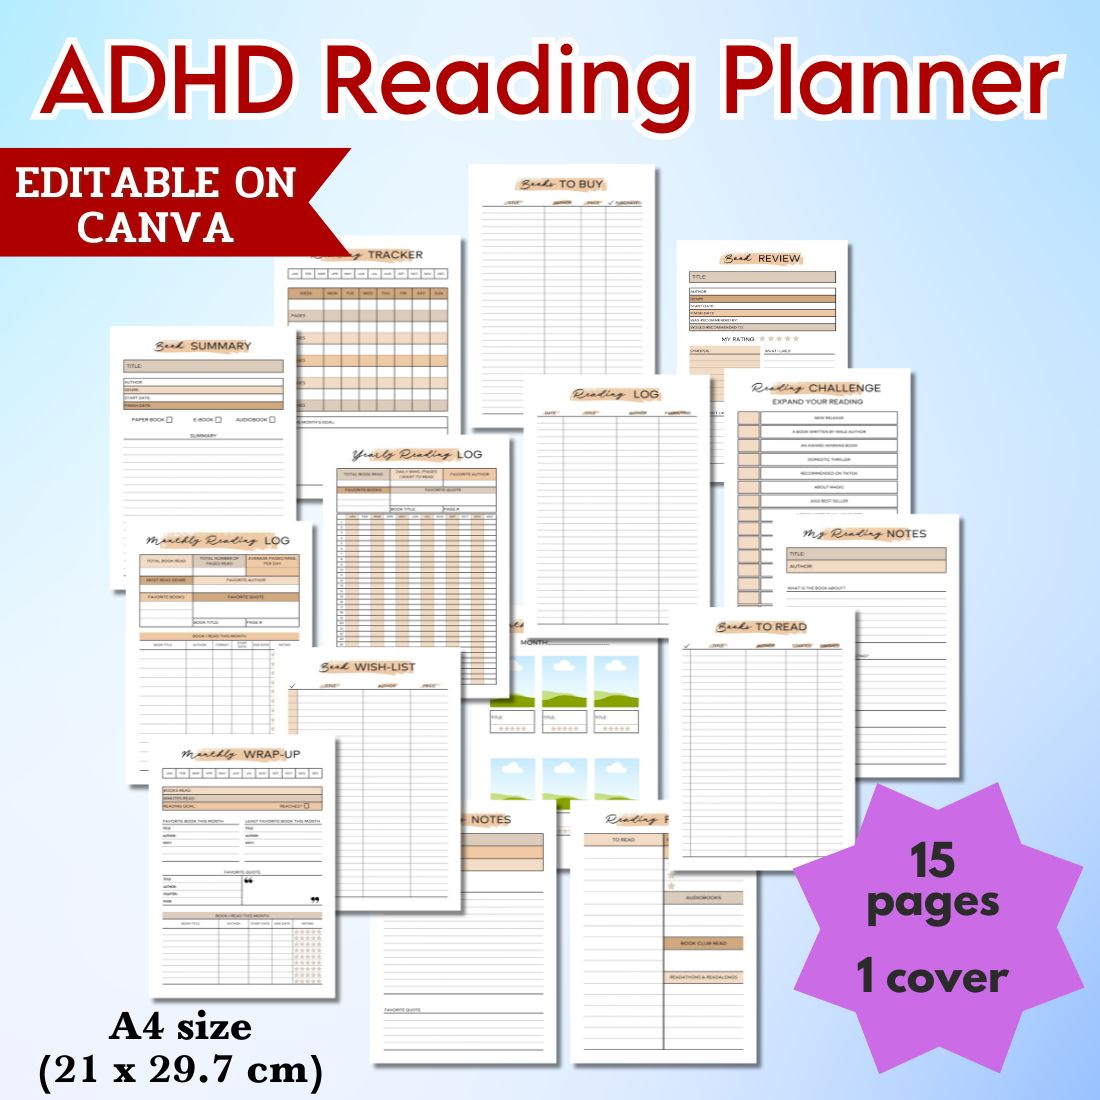 ADHD Reading Planner - Canva Template cover image.